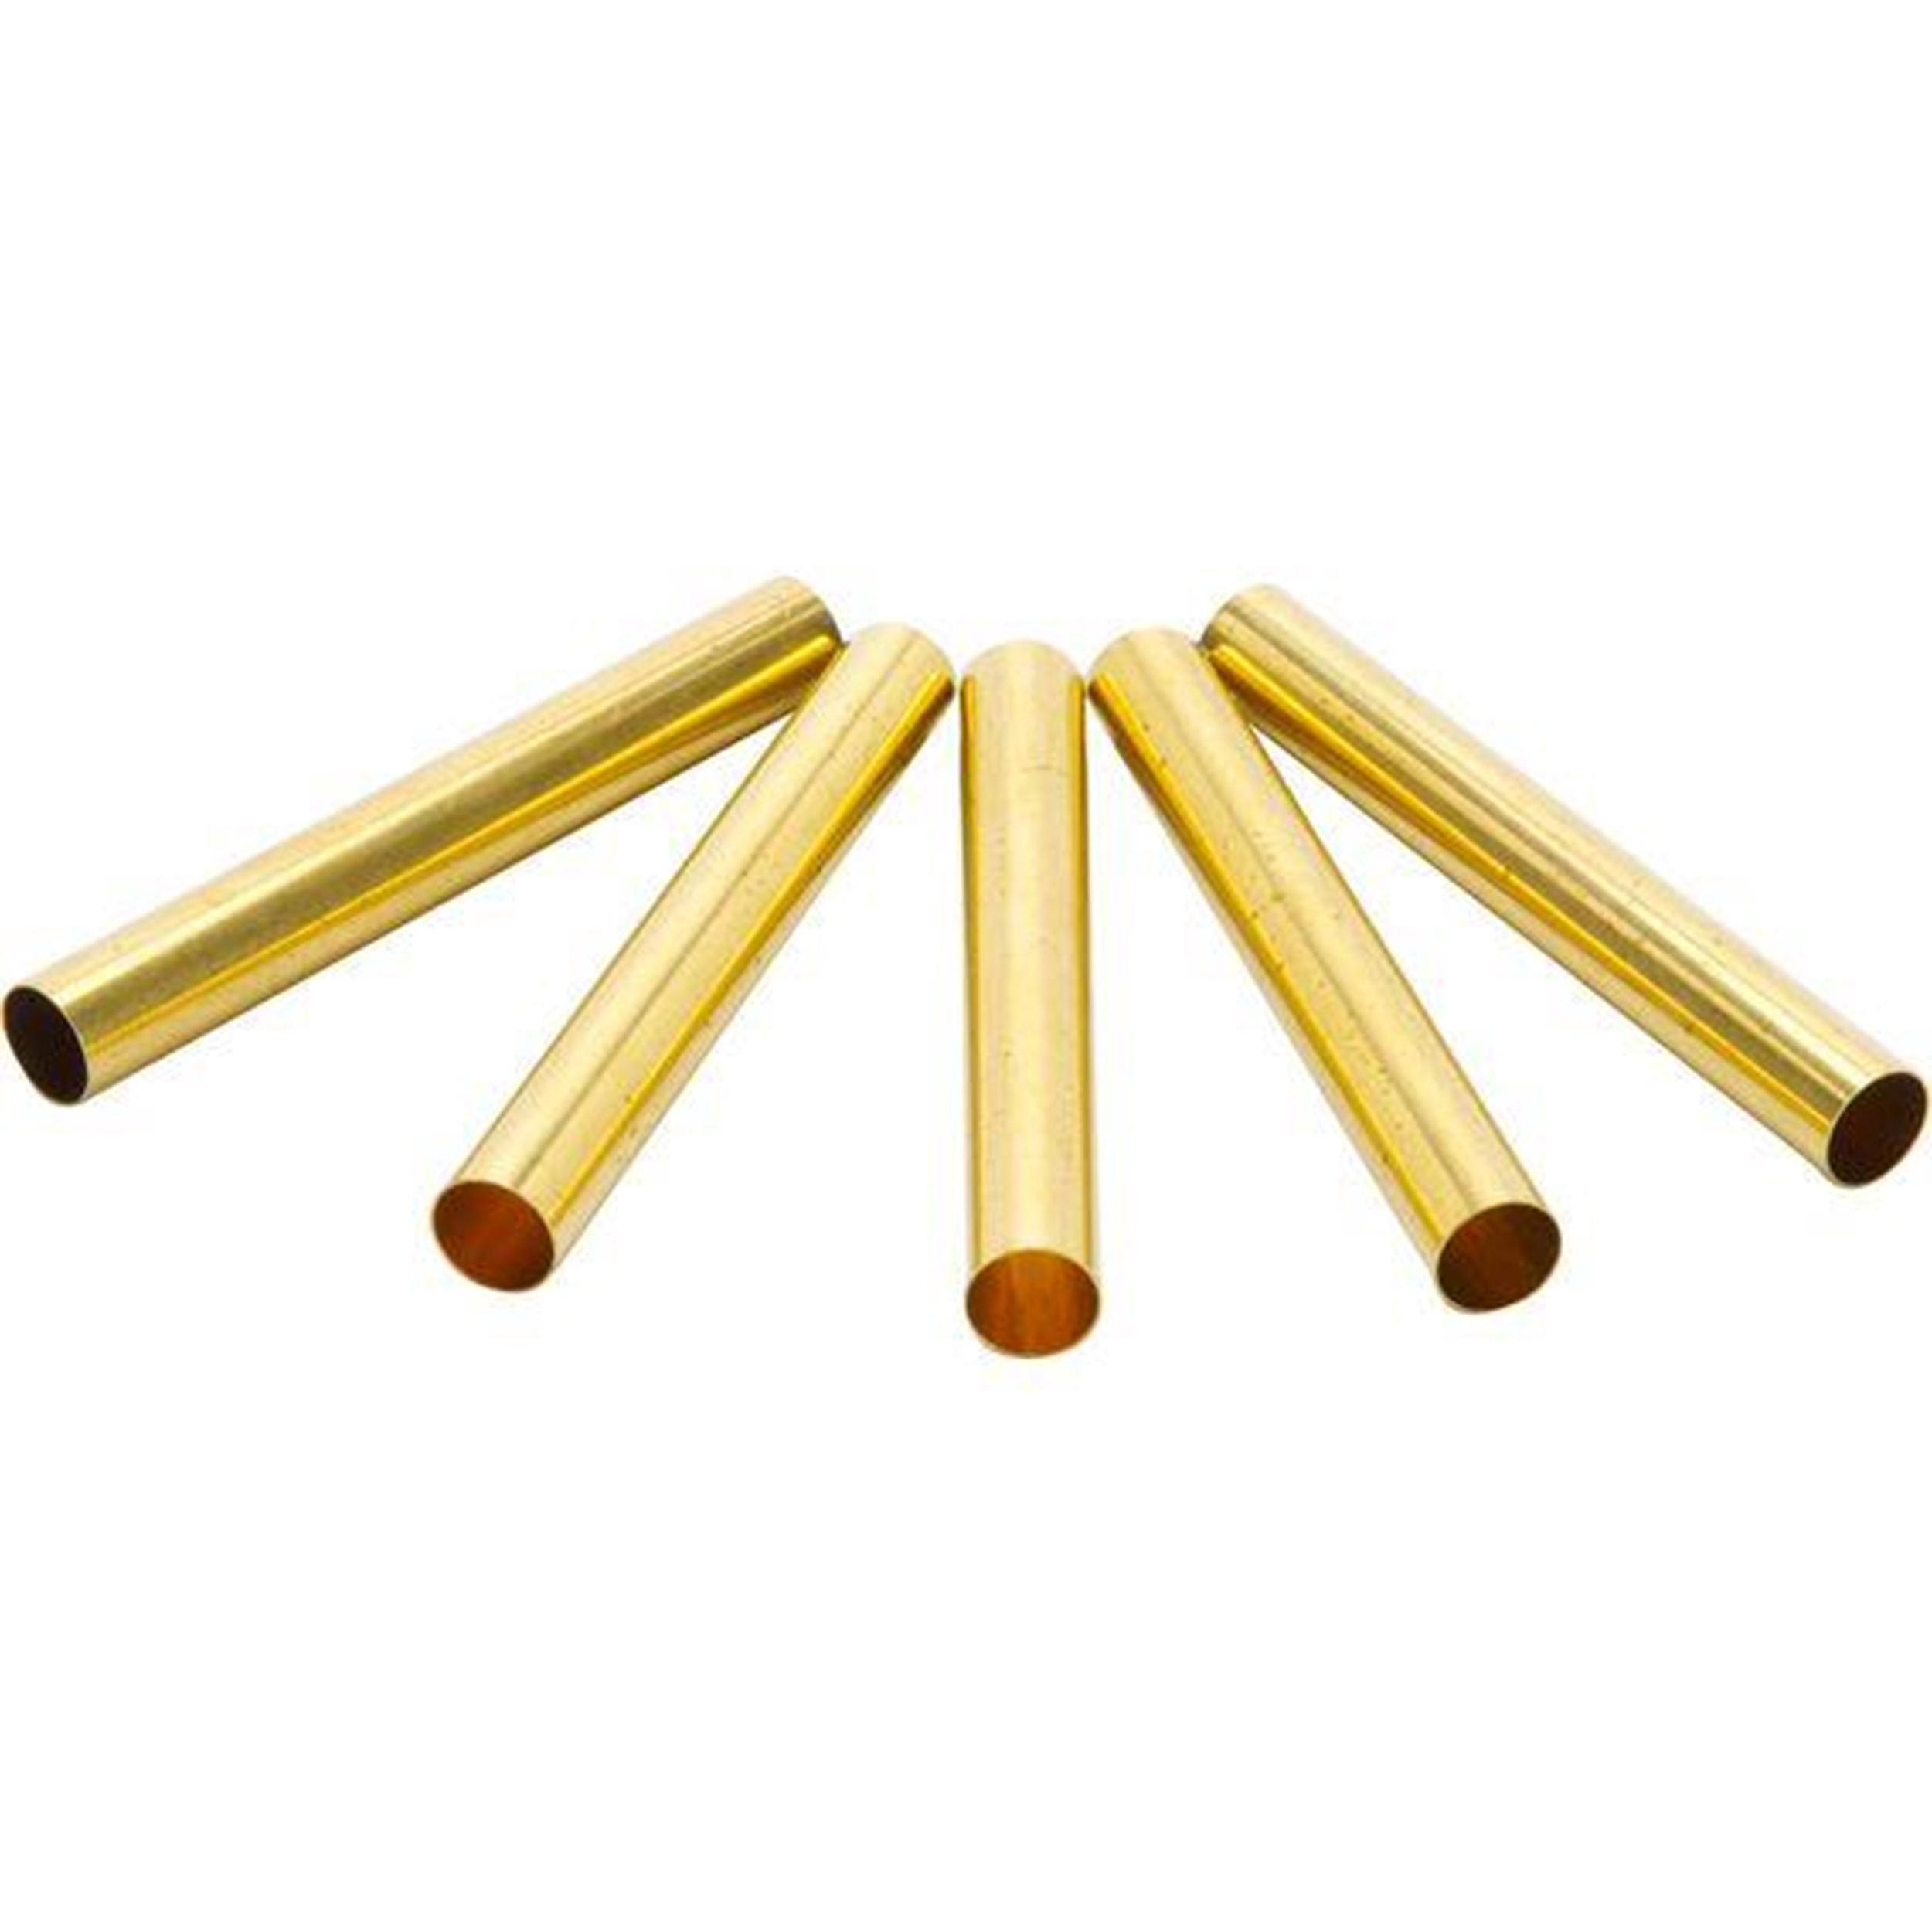 Replacement Tubes For Atlas Ball Point Pens 5-piece